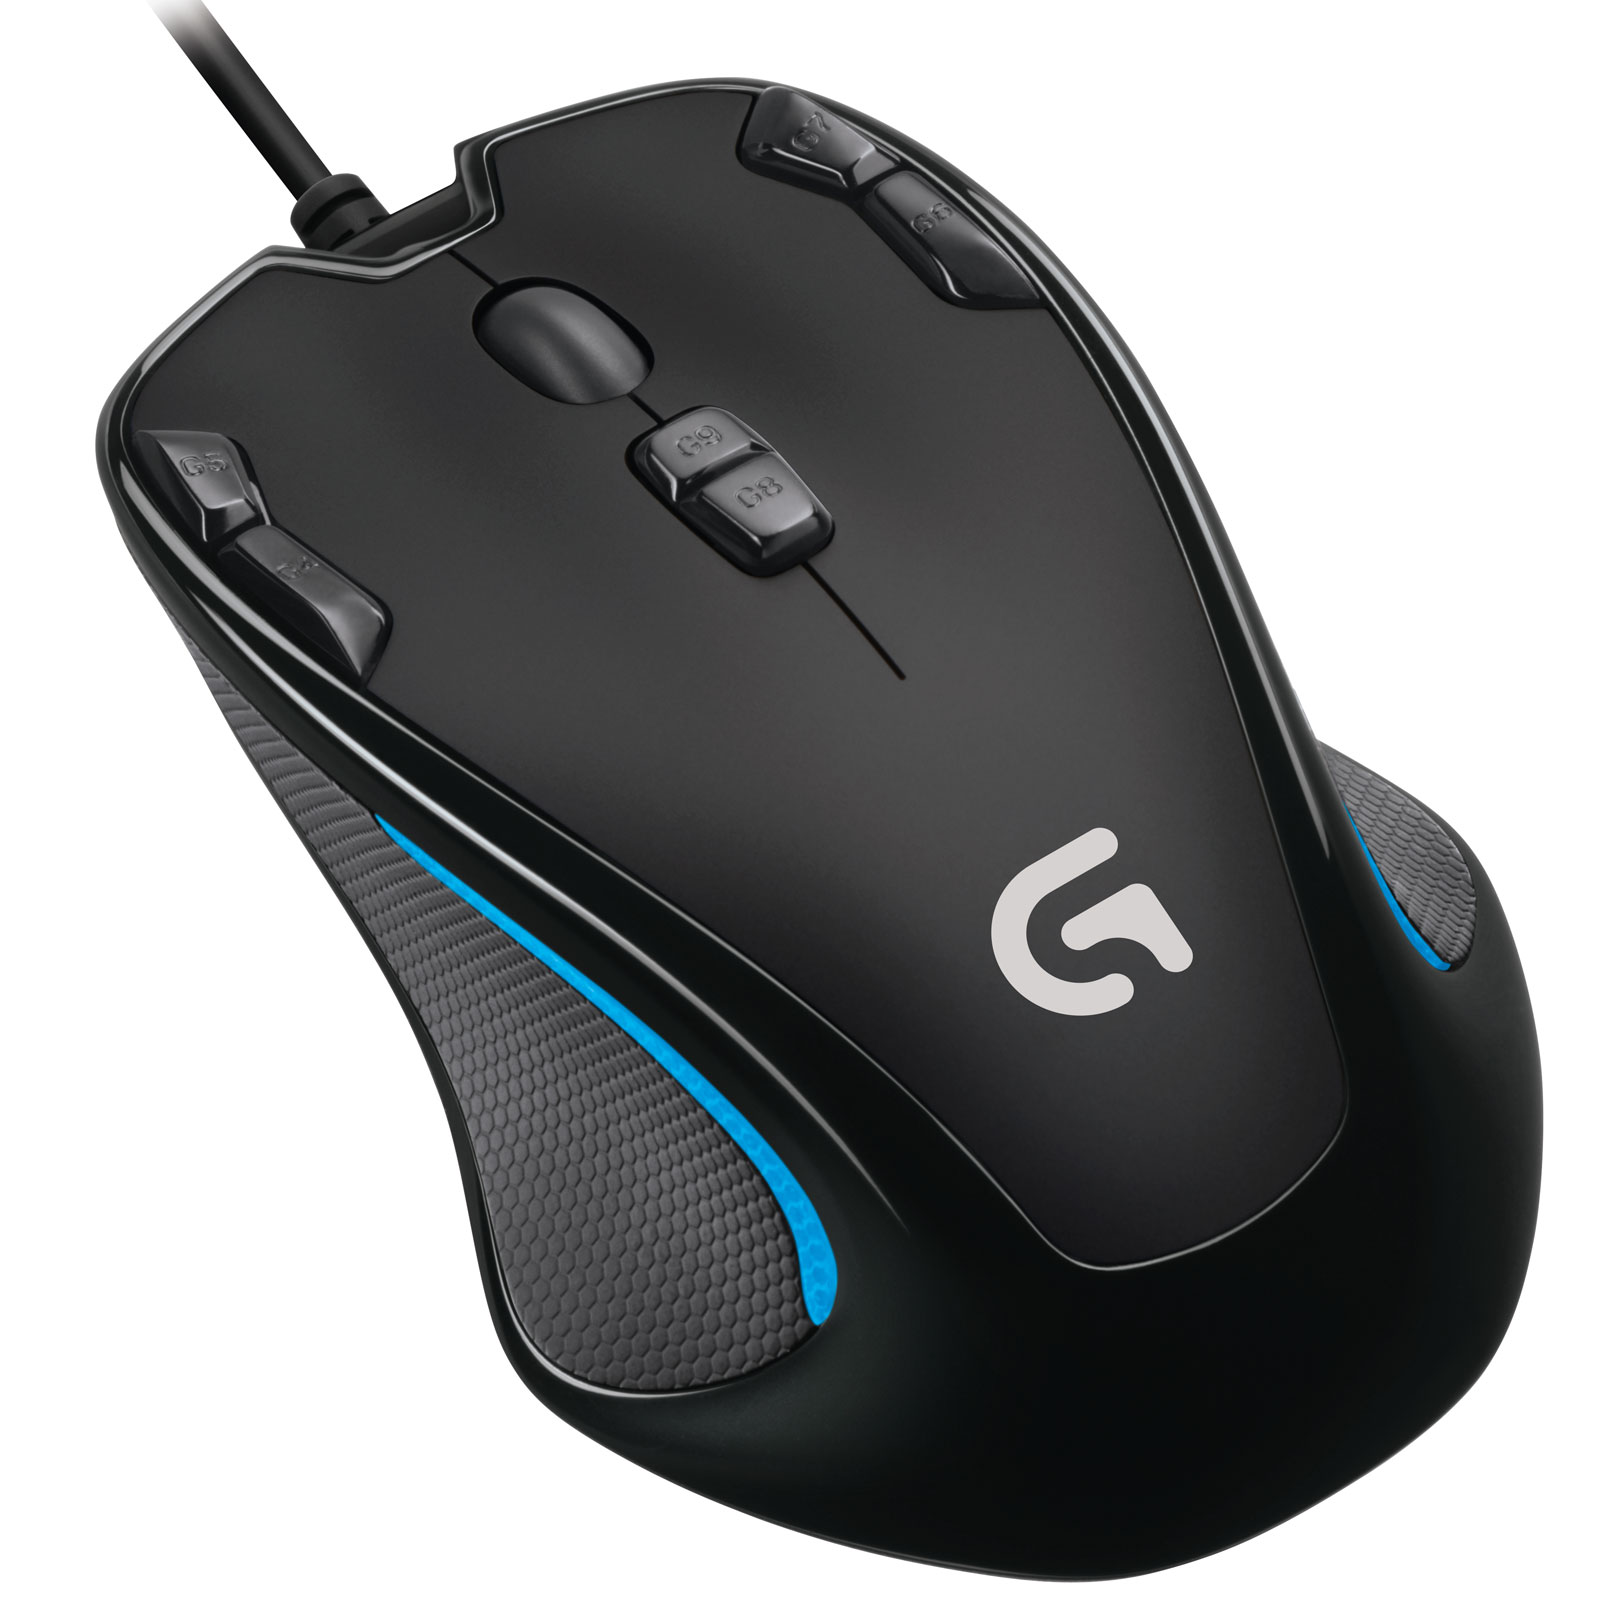 Logitech G300S Optical Gaming Mouse 910-004345